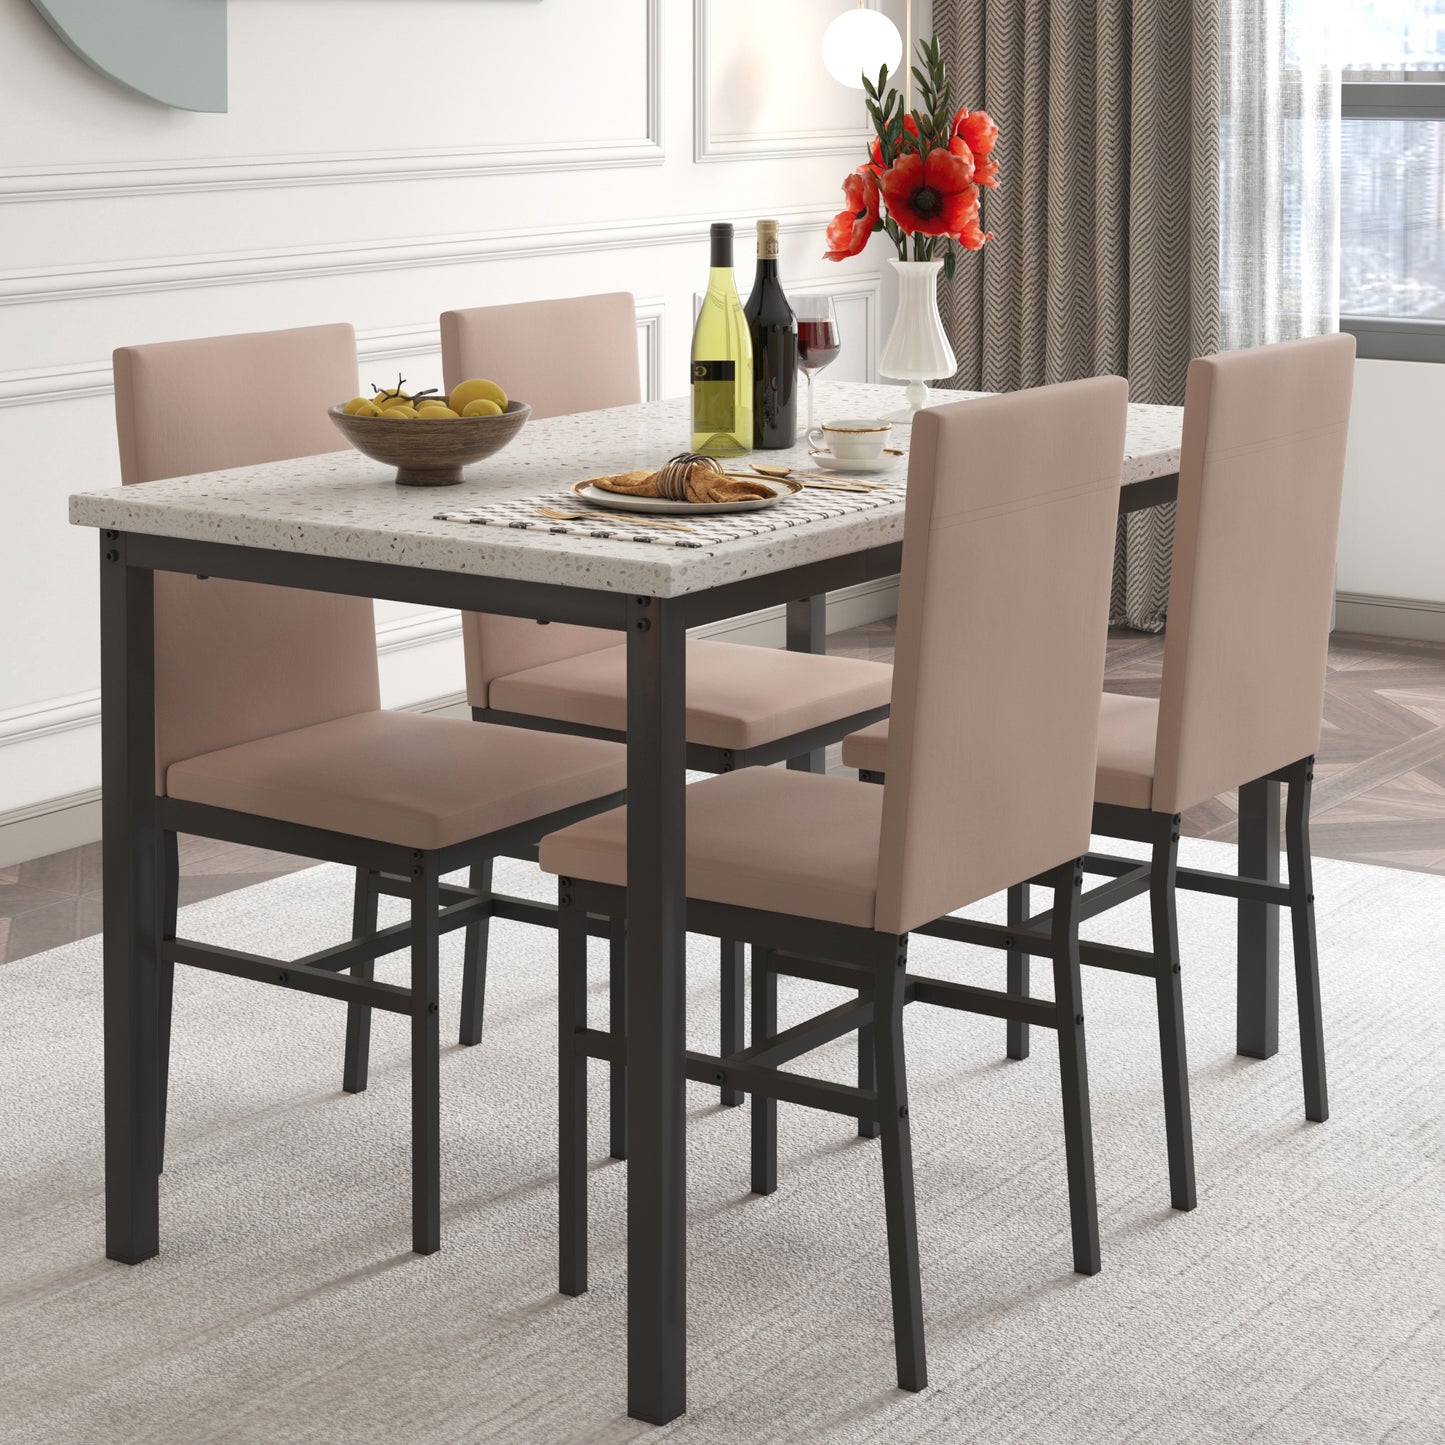 7 Piece Dining Set, Modern Dining Table and Chairs Set for 6, Kitchen Dining Table Set with Faux Marble Tabletop and 4 PU Leather Upholstered Chairs, for Small Space, Breakfast Nook, D9211